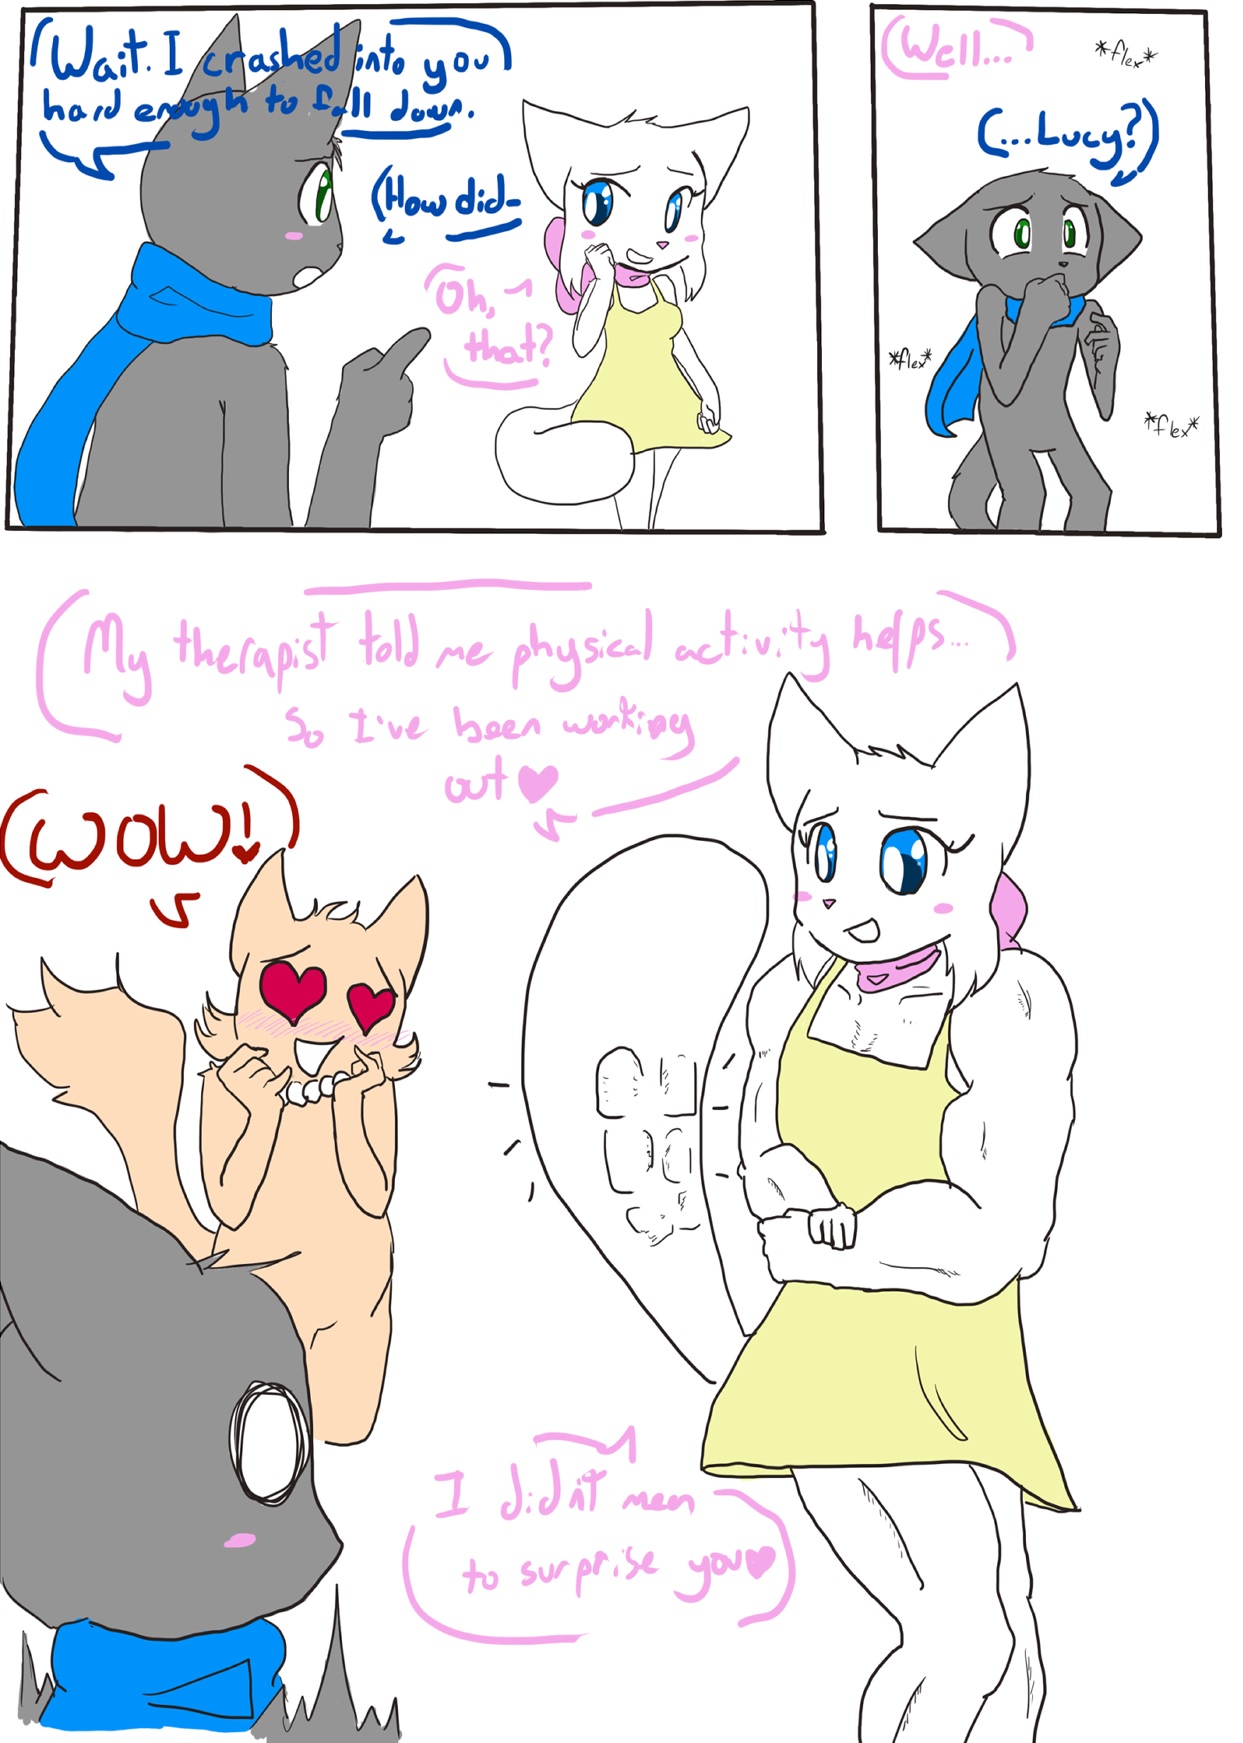 Candybooru image #10511, tagged with Daisy Lucy Mike Moonshine_(Artist) comic